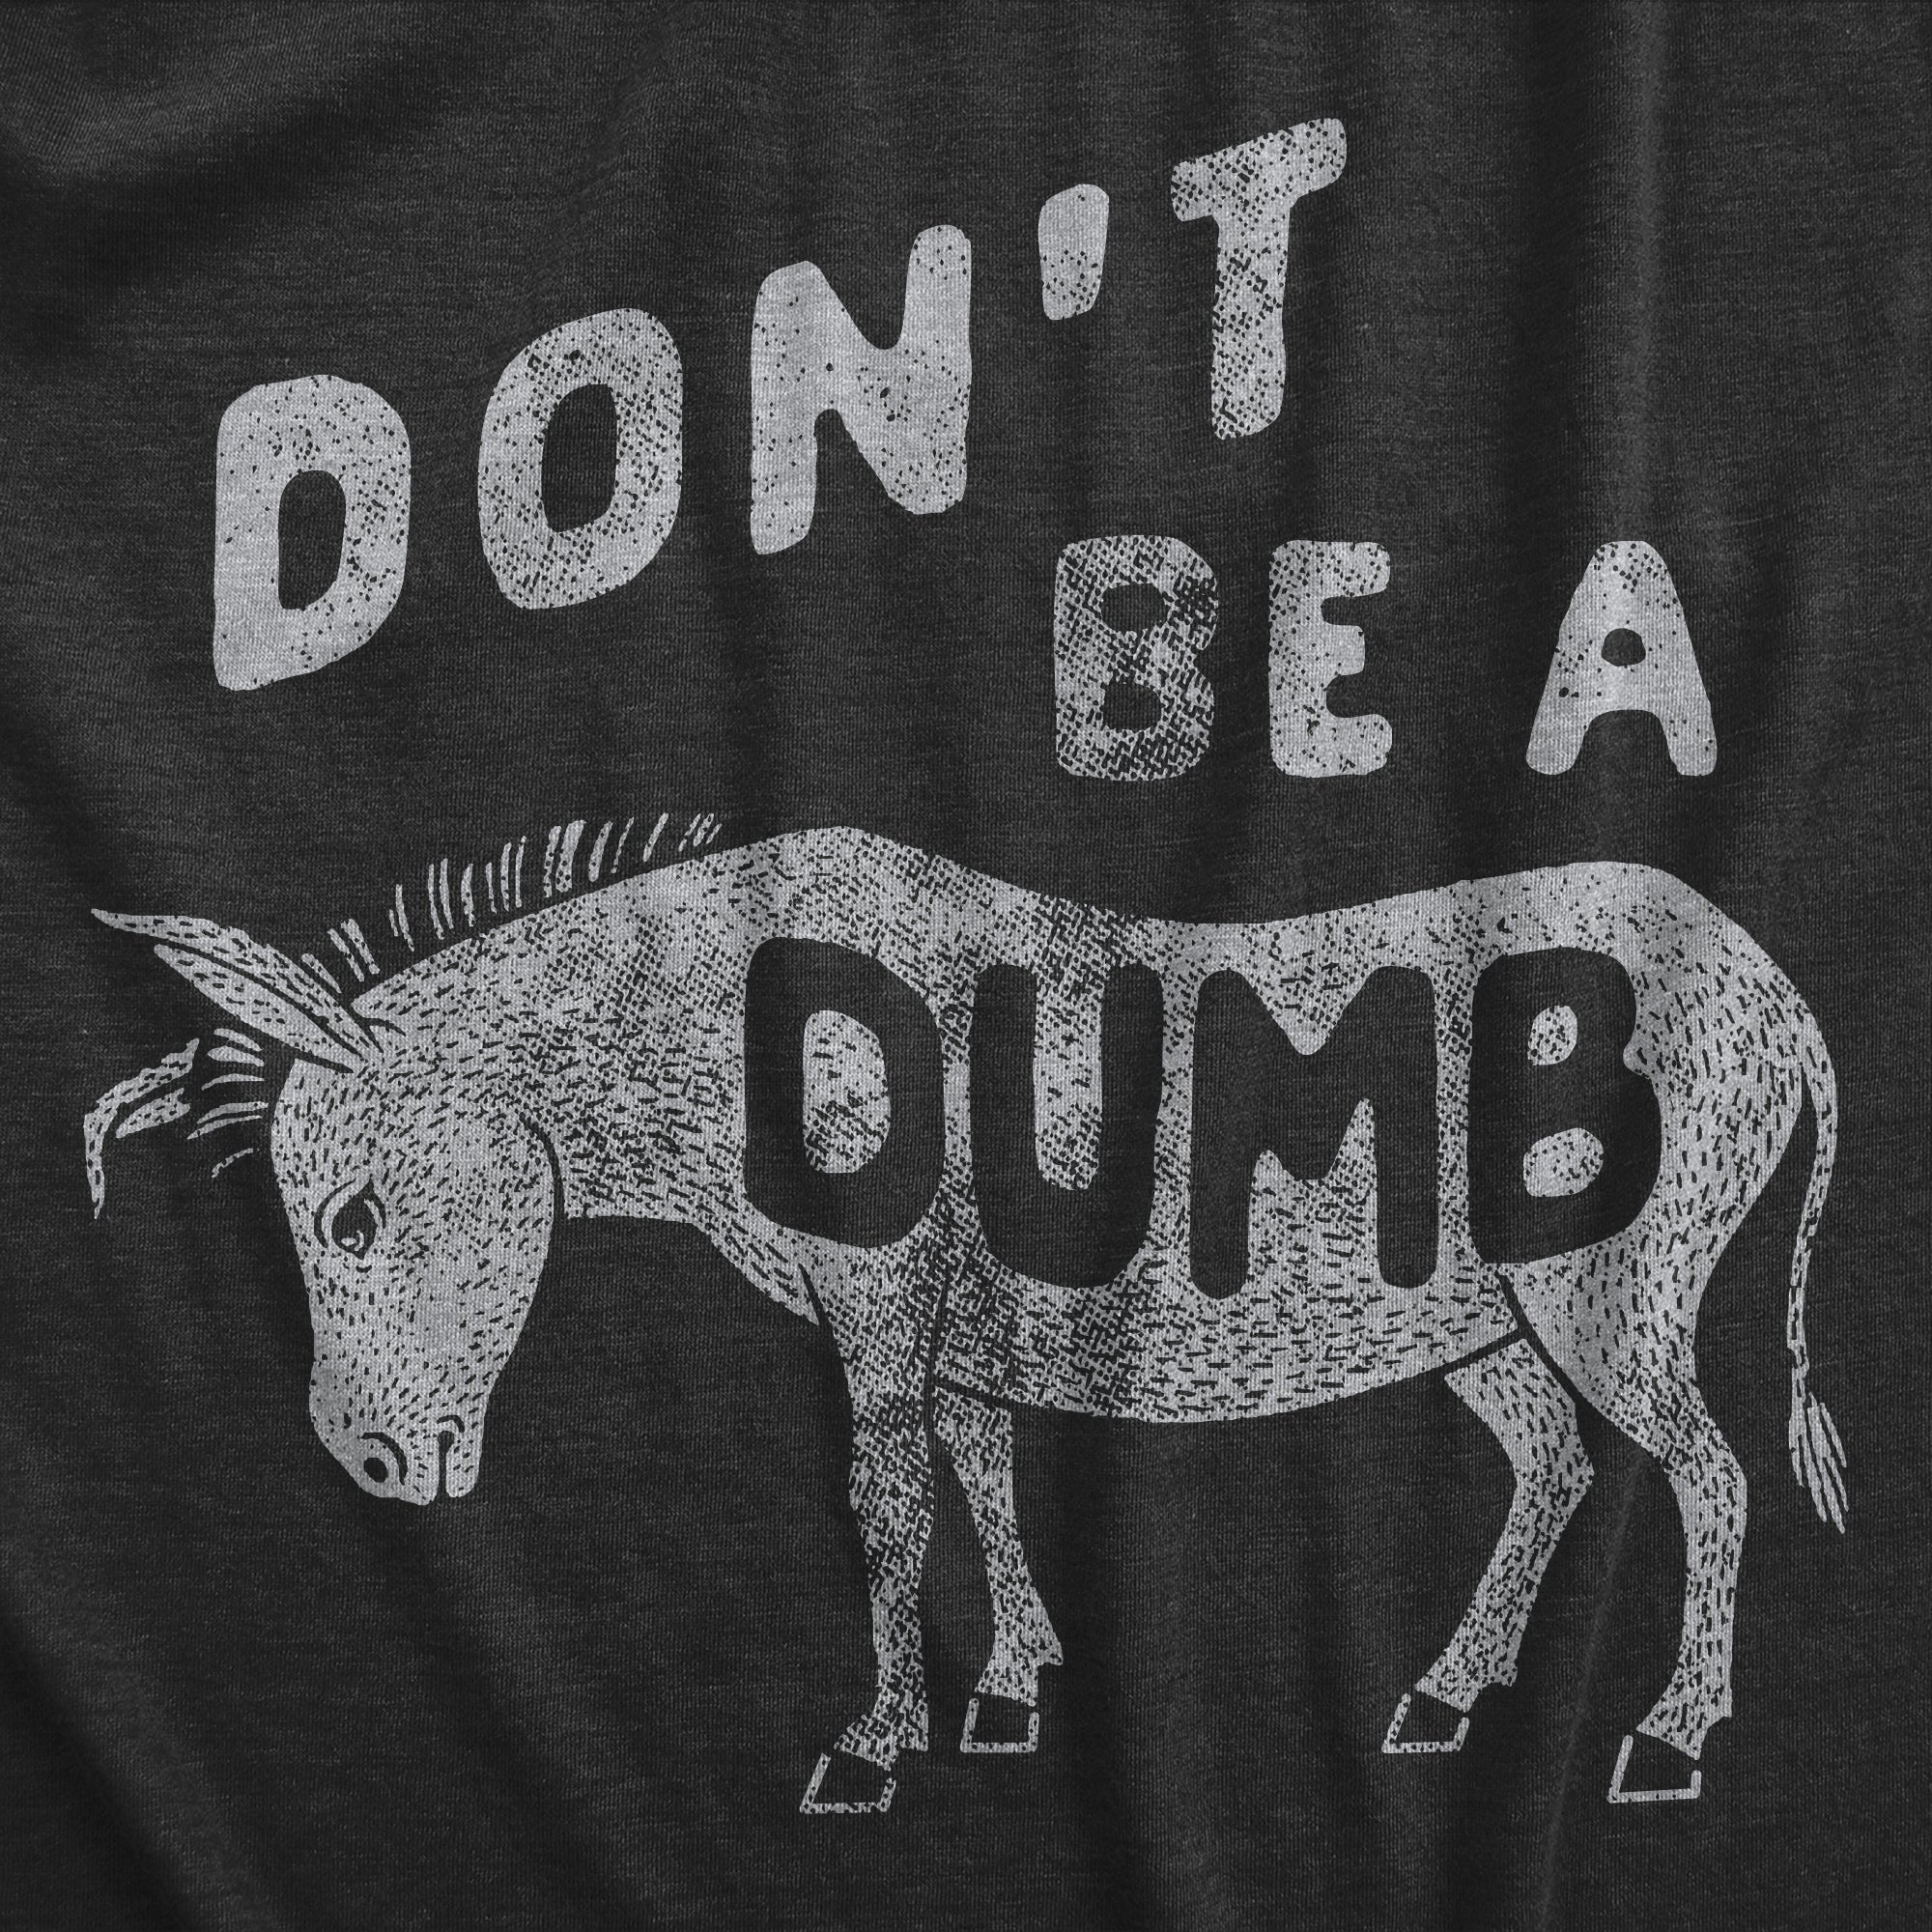 Funny Heather Black - DUMBASS Dont Be A Dumb Ass Womens T Shirt Nerdy Animal Sarcastic Tee